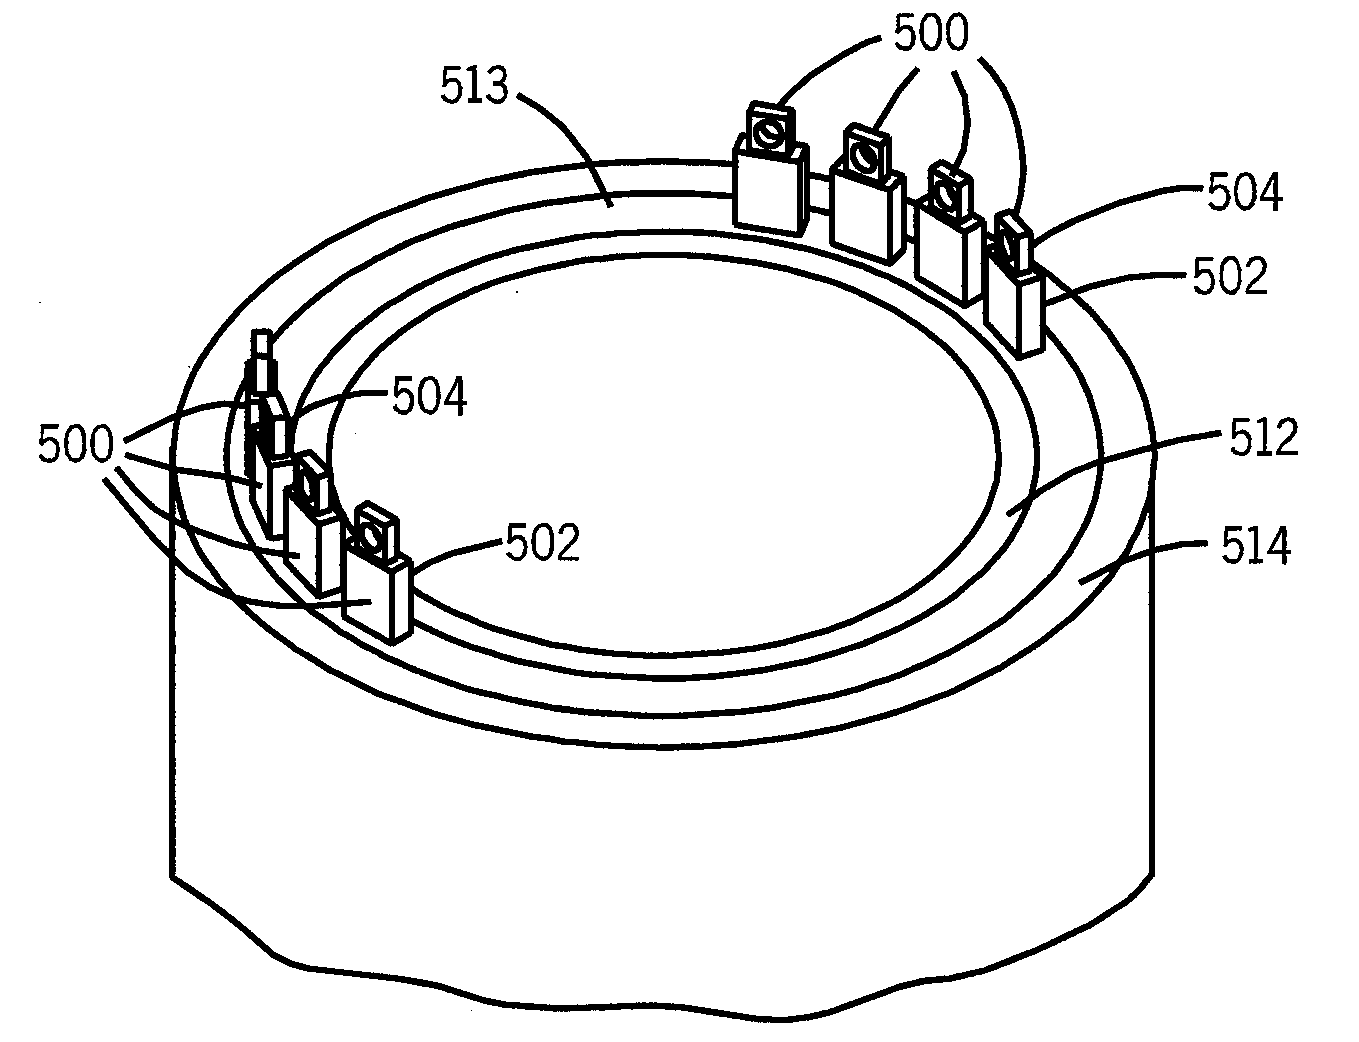 Method and tool for creating a passive shim location within a gradient coil